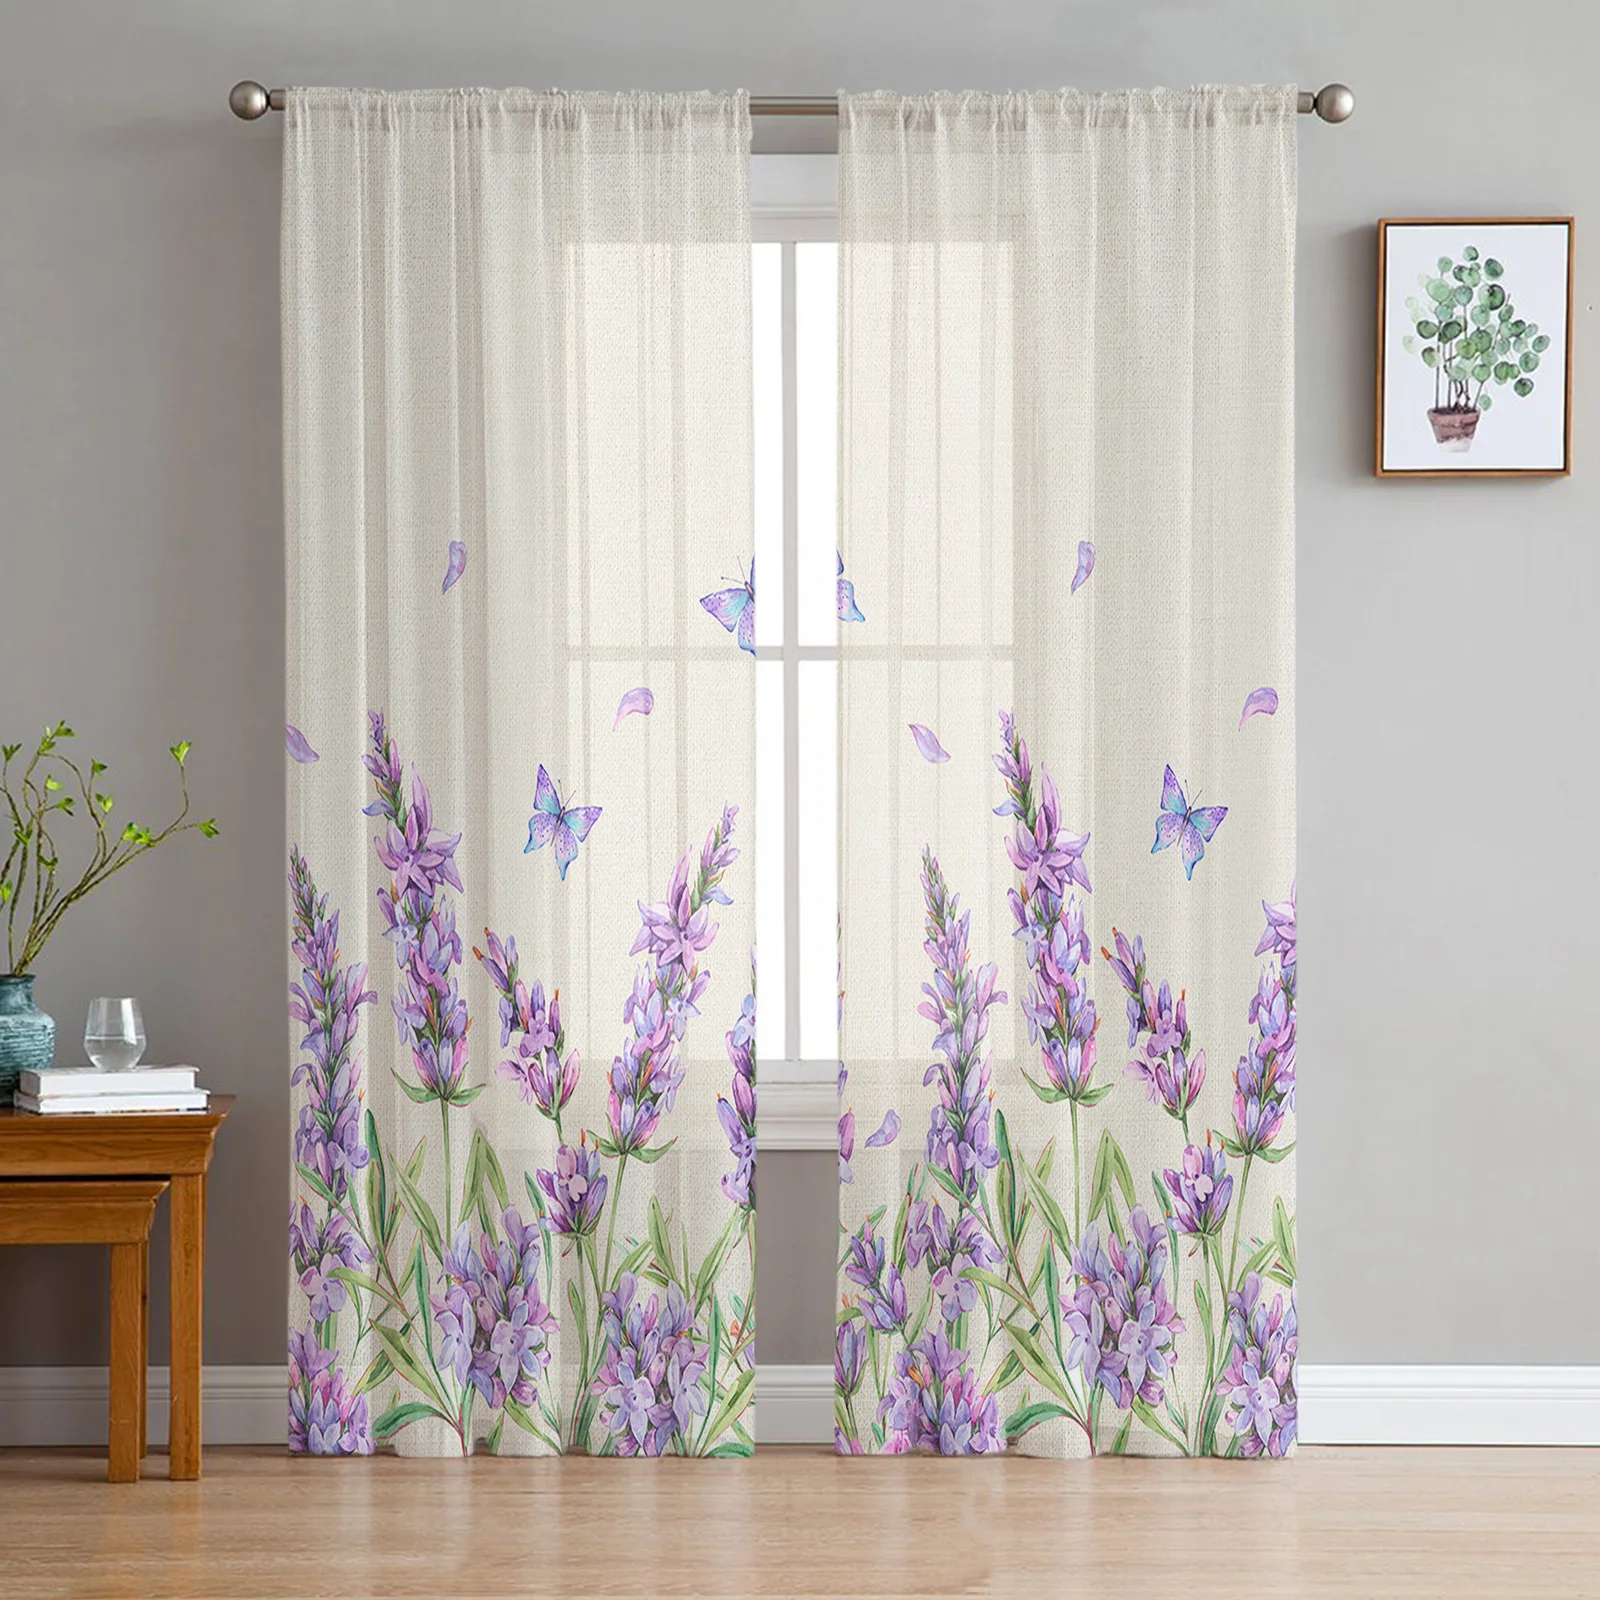 

Watercolor Lavender Flower Butterfly Sheer Curtains for Living Room Bedroom Home Decor Kitchen Tulle for Windows Voile Drapes